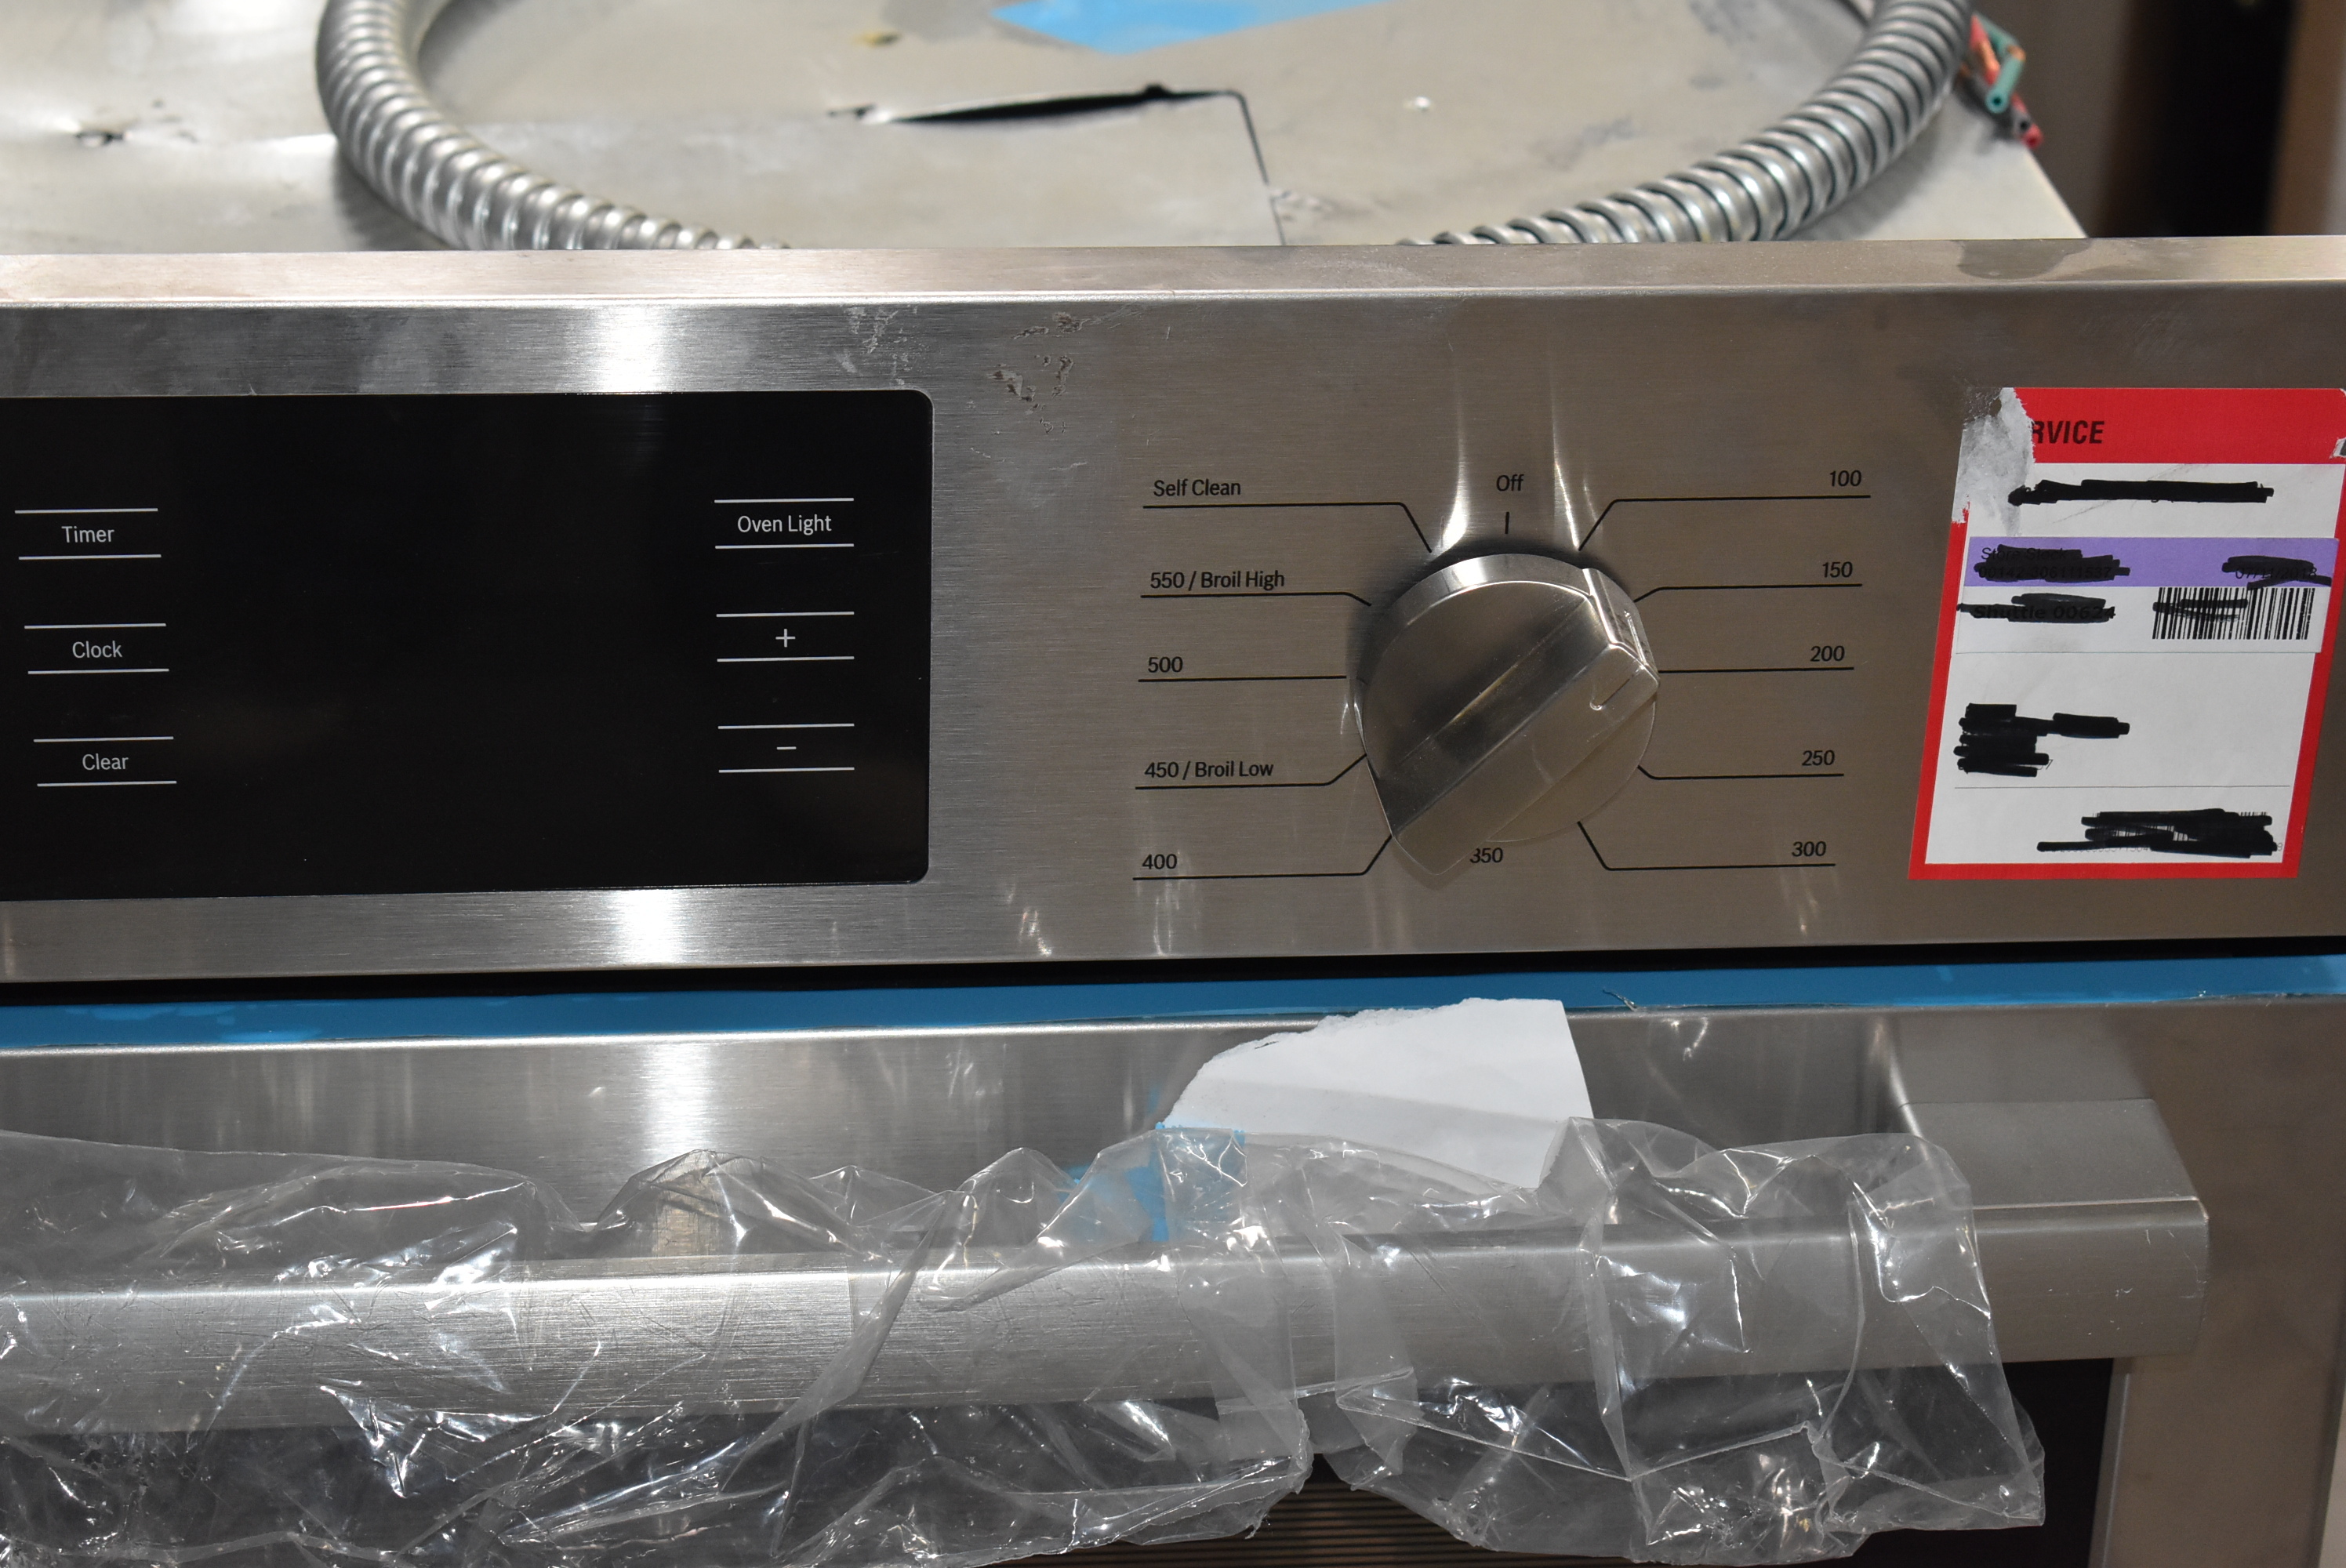 Bosch Hbl5451uc 30 Stainless Single Electric Wall Oven Nob 29134 Hrt